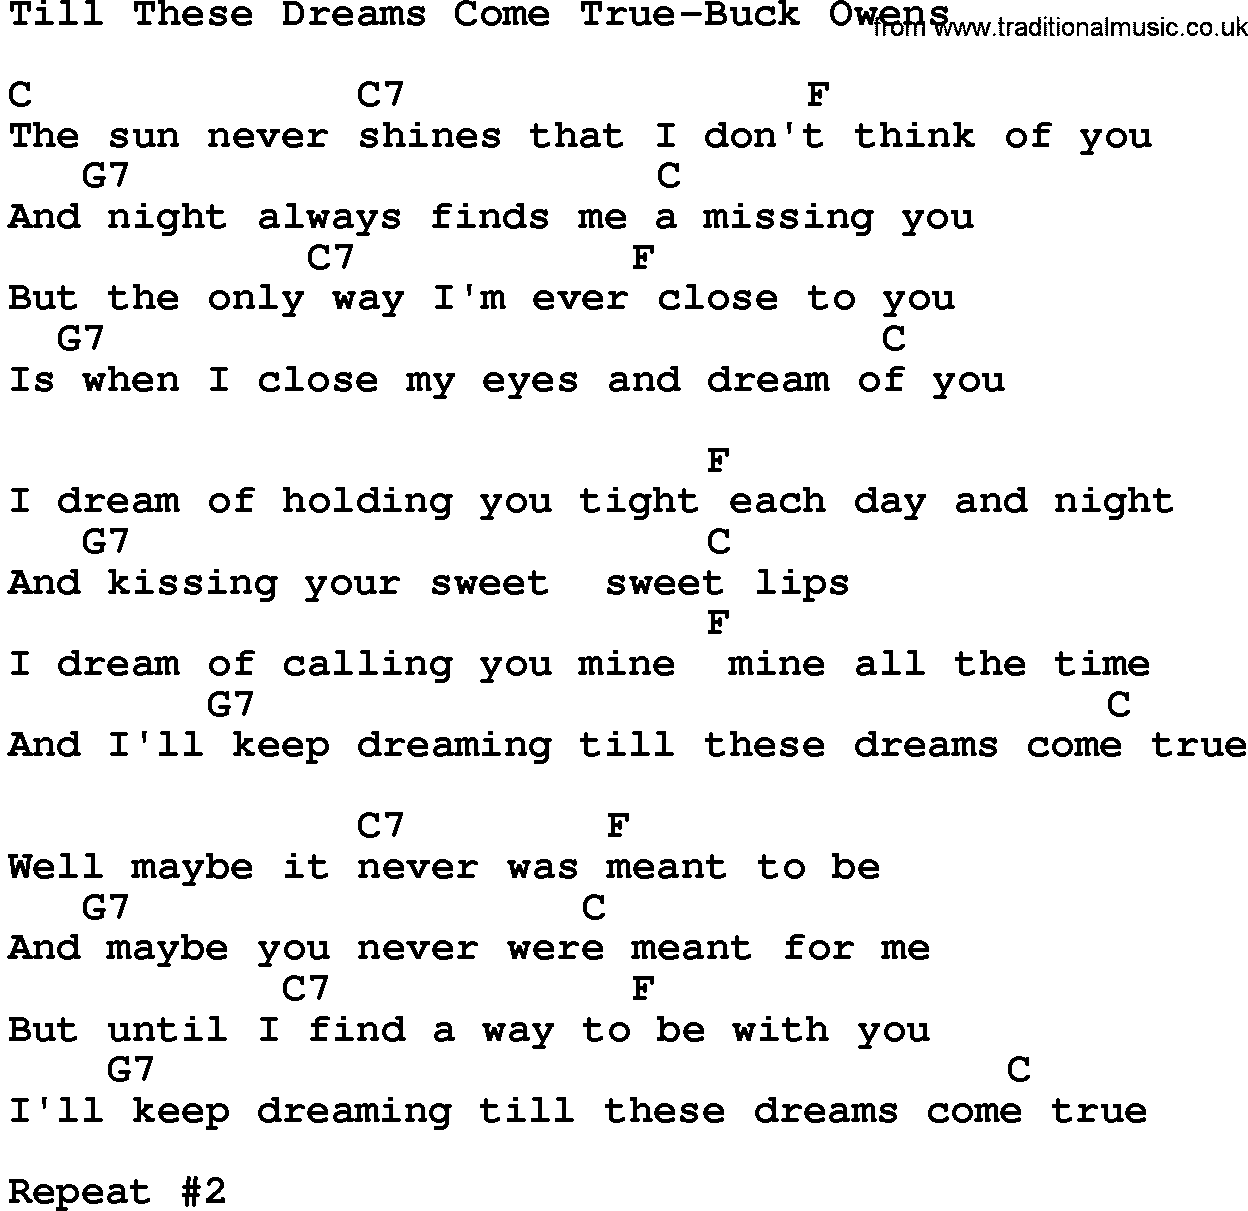 Country music song: Till These Dreams Come True-Buck Owens lyrics and chords